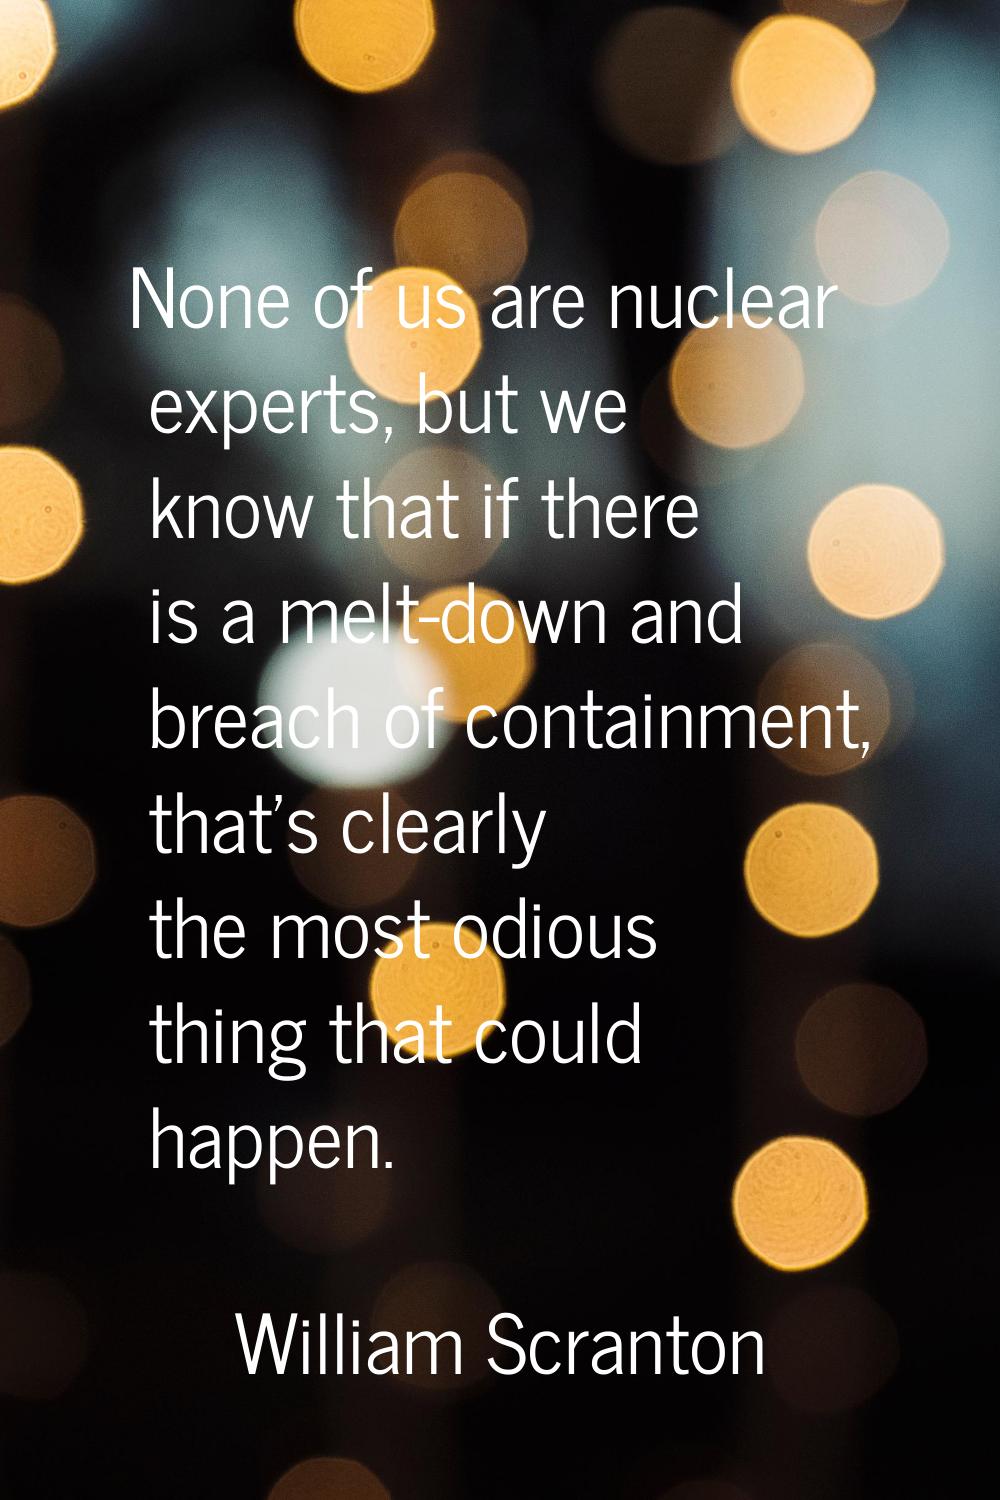 None of us are nuclear experts, but we know that if there is a melt-down and breach of containment,